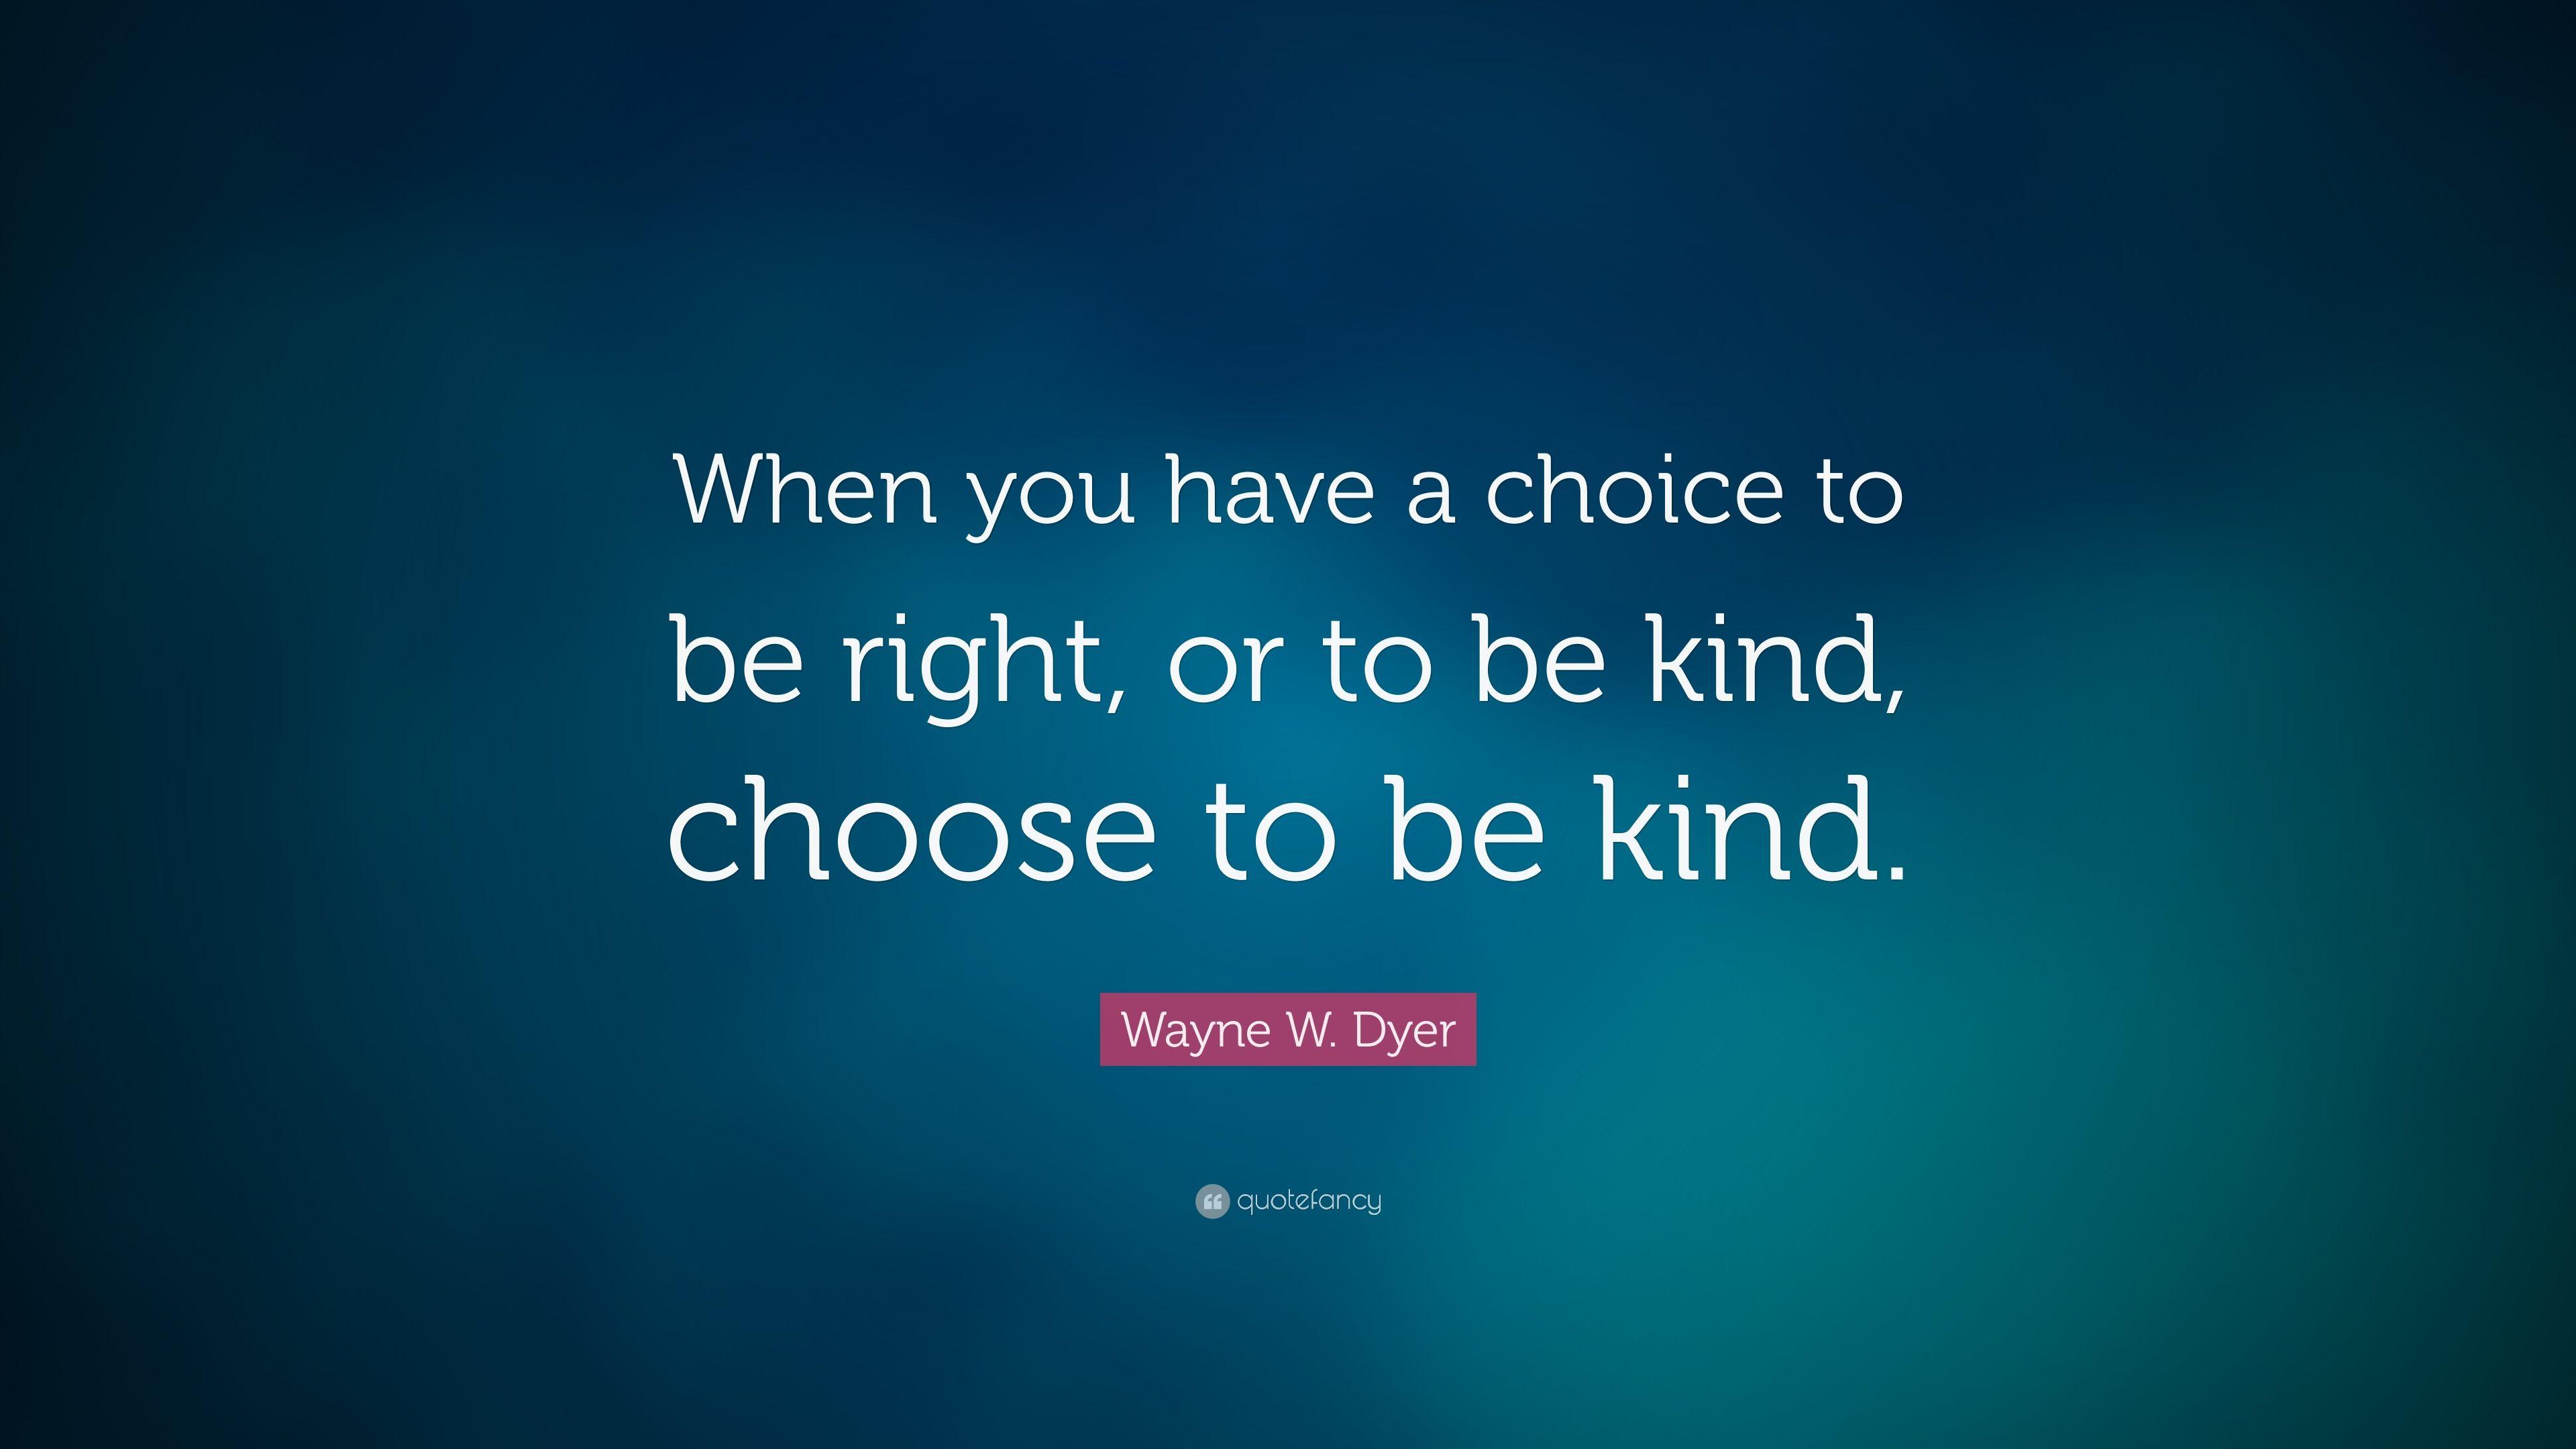 Wayne W. Dyer Quote: “When you have a choice to be right, or to be